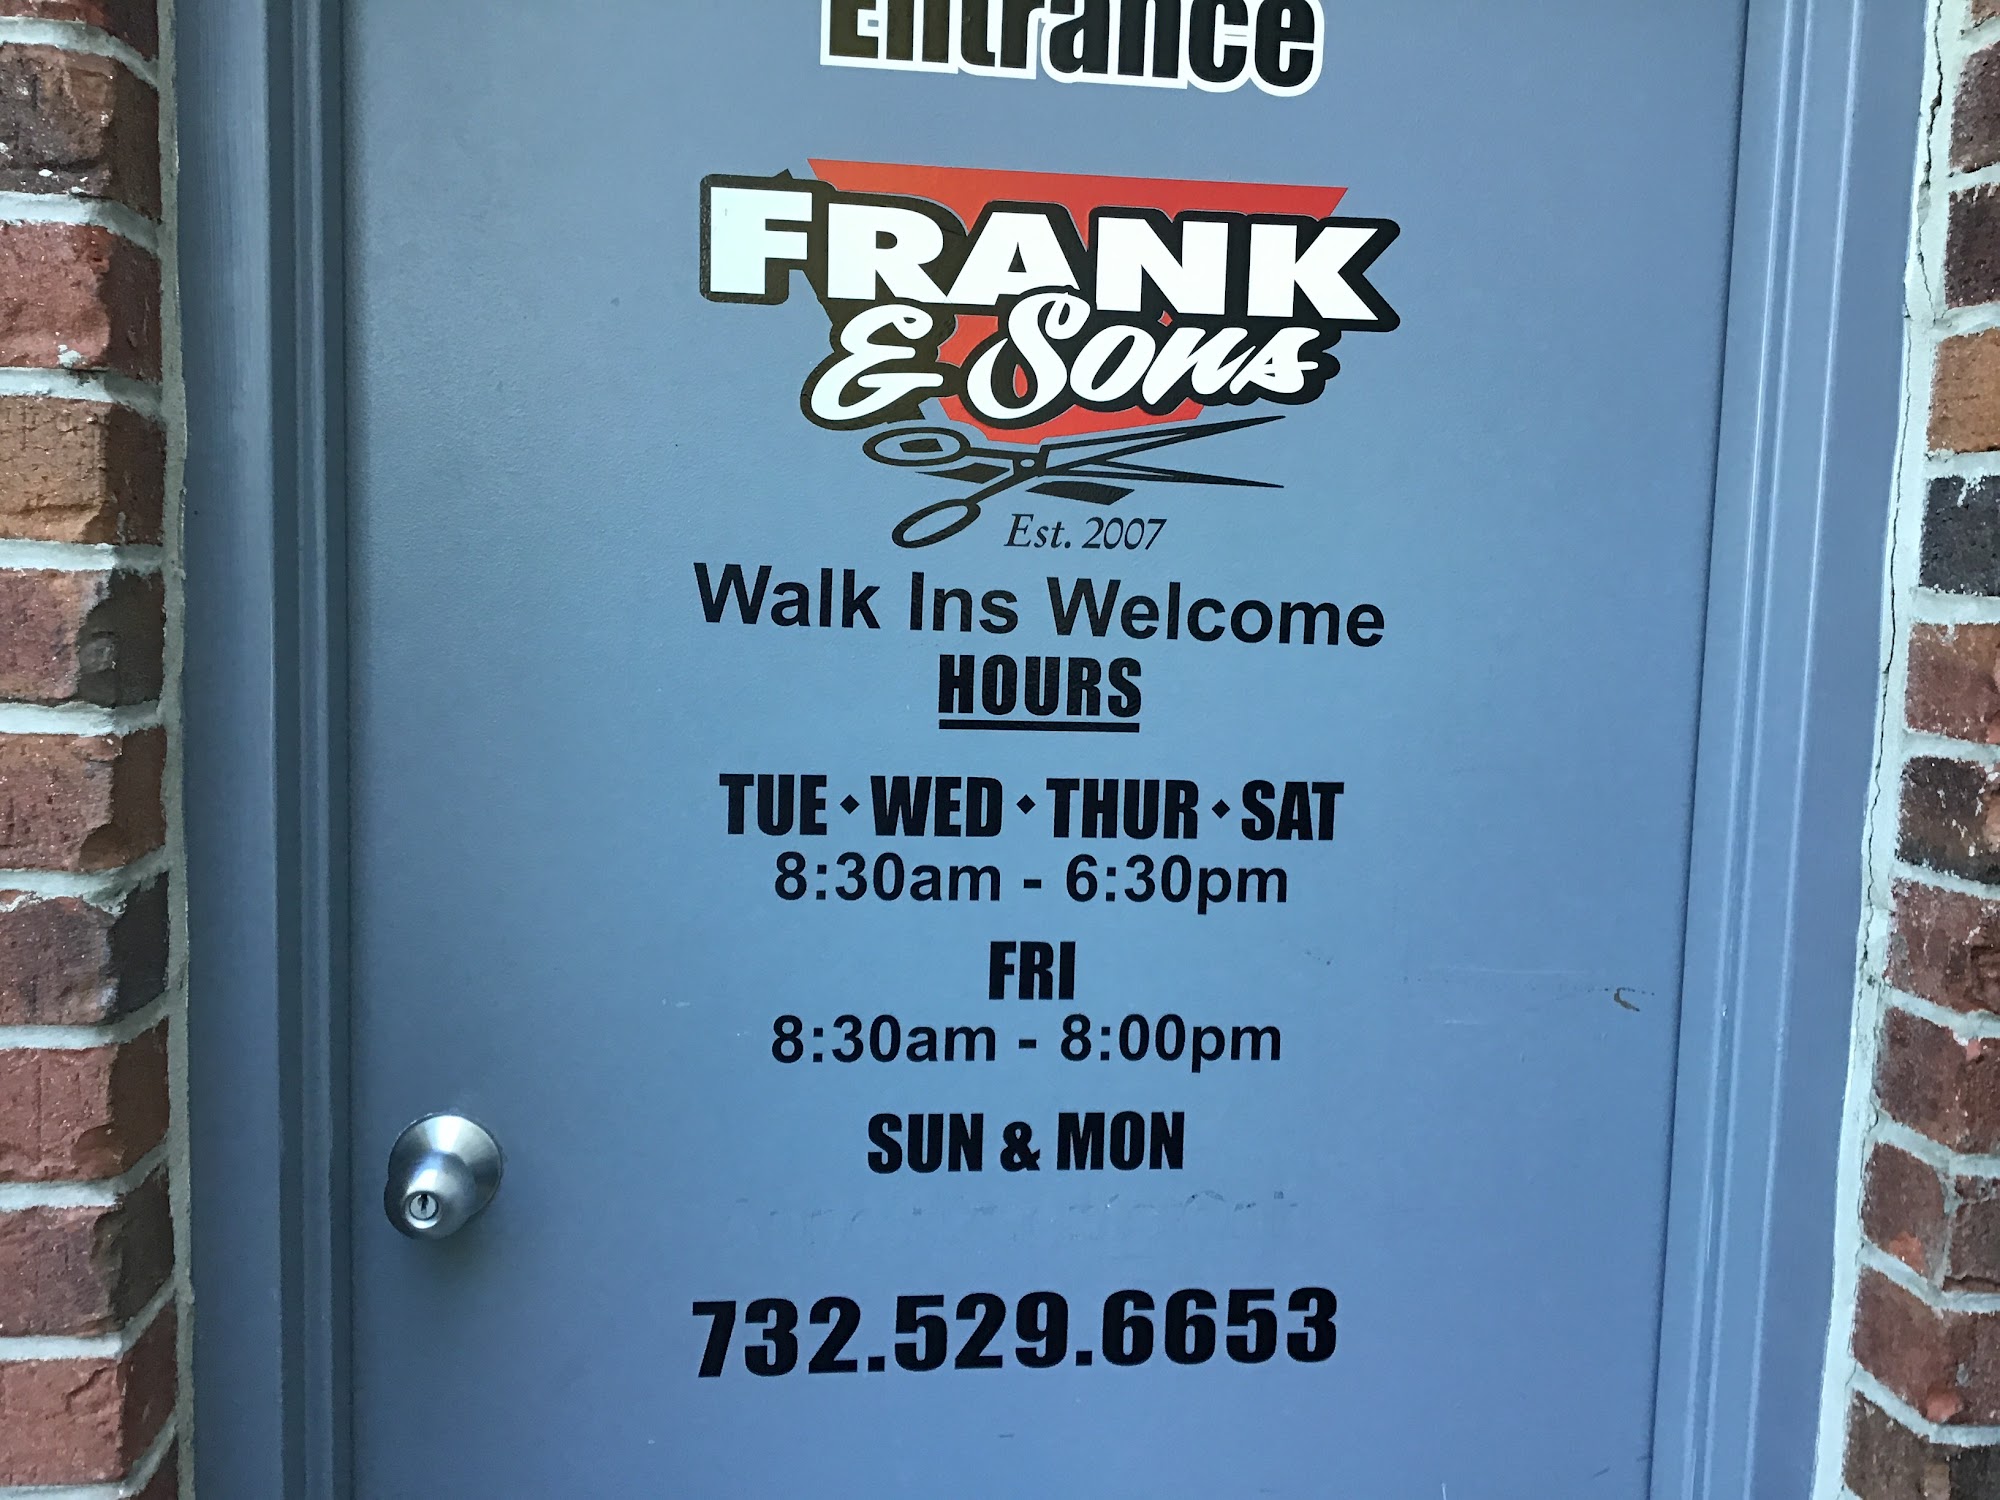 Frank and Sons Barbershop 366 North Ave, Dunellen New Jersey 08812